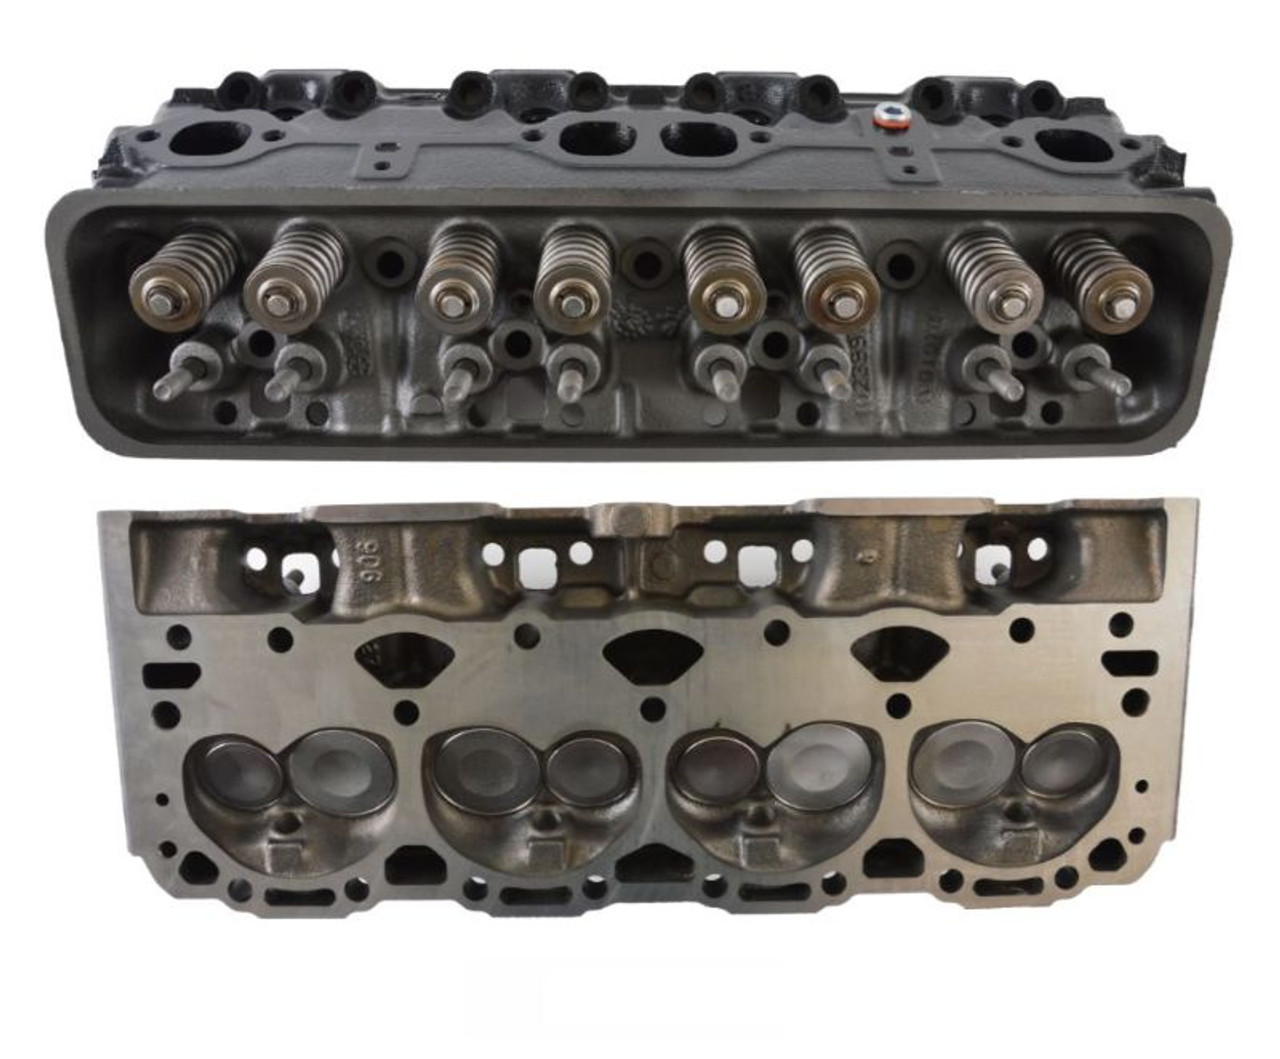 Cylinder Head Assembly - 1998 Chevrolet C2500 Suburban 5.7L (CH1062R.H73)